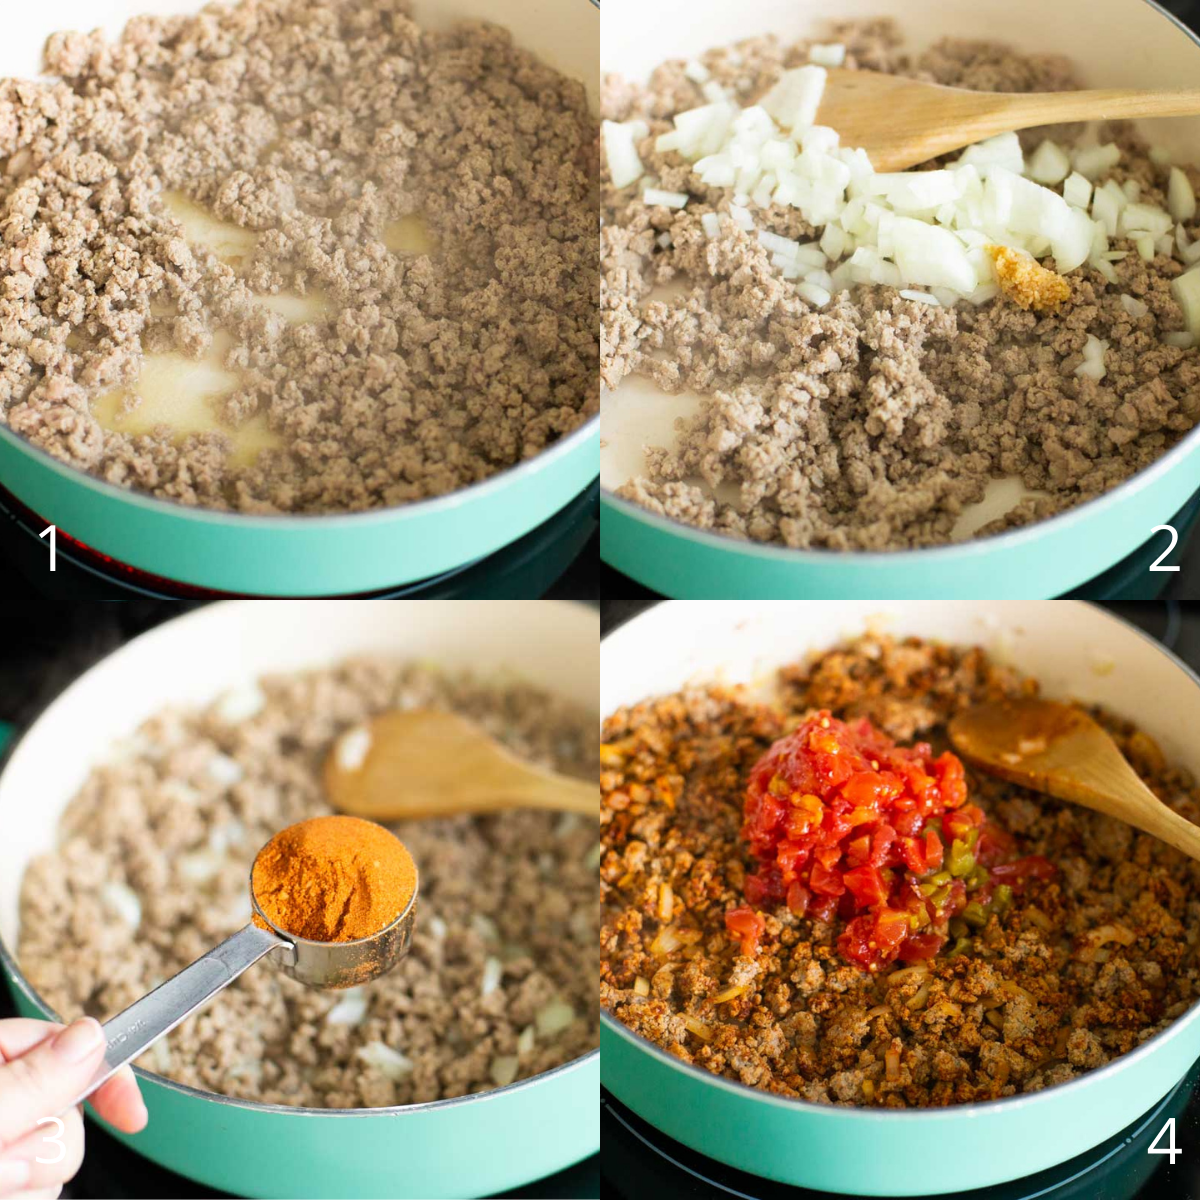 Step by step photos show how to brown the ground turkey and season it for the pasta skillet.